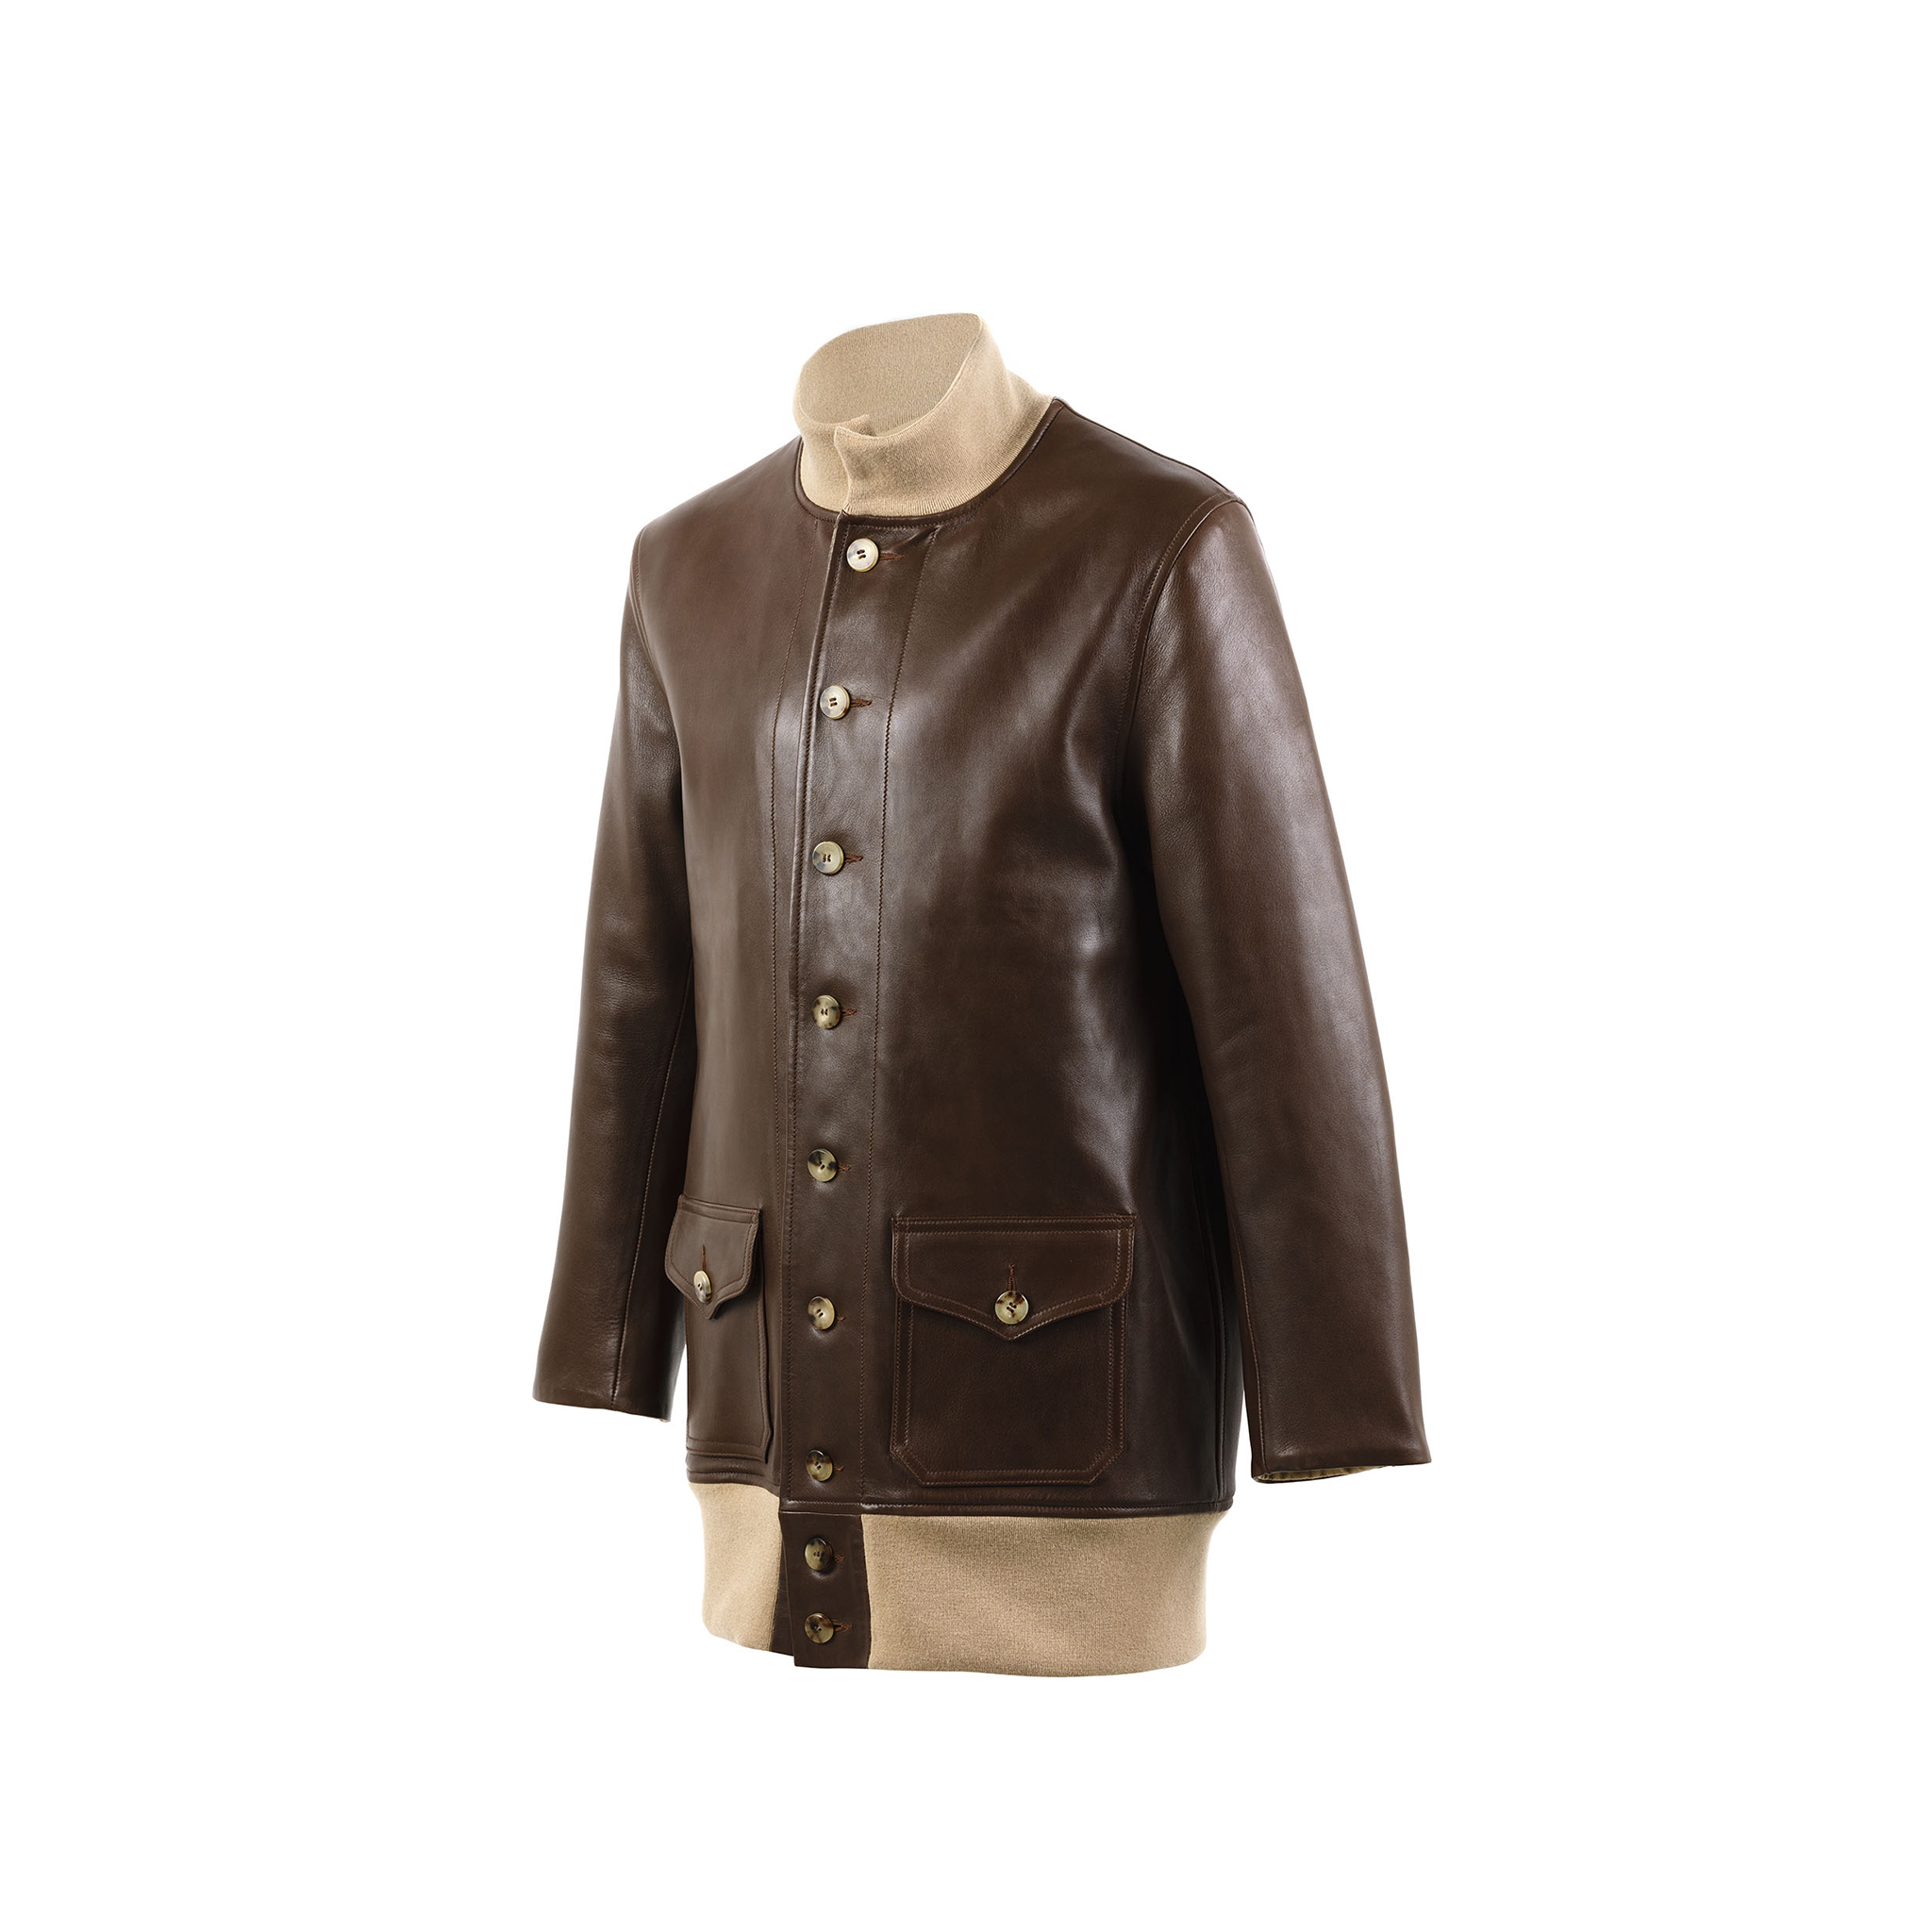 A1 3/4 Coat - Glossy leather - Brown color